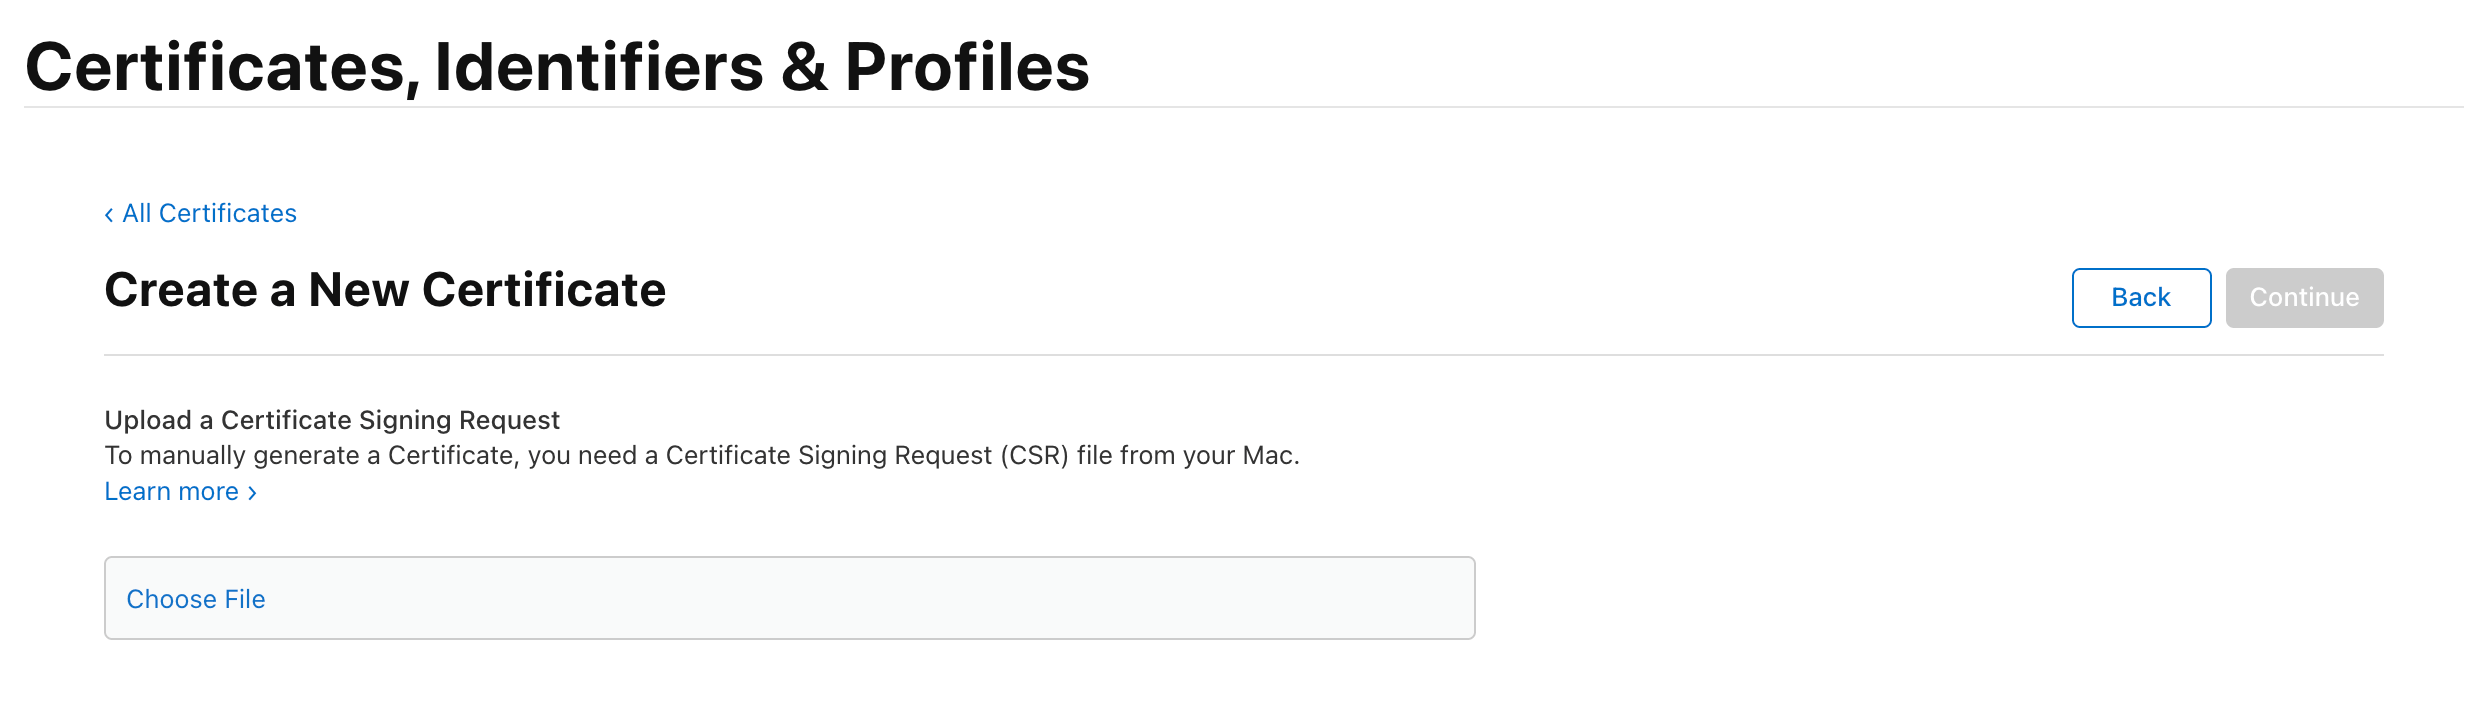 creating a certificate for mac email